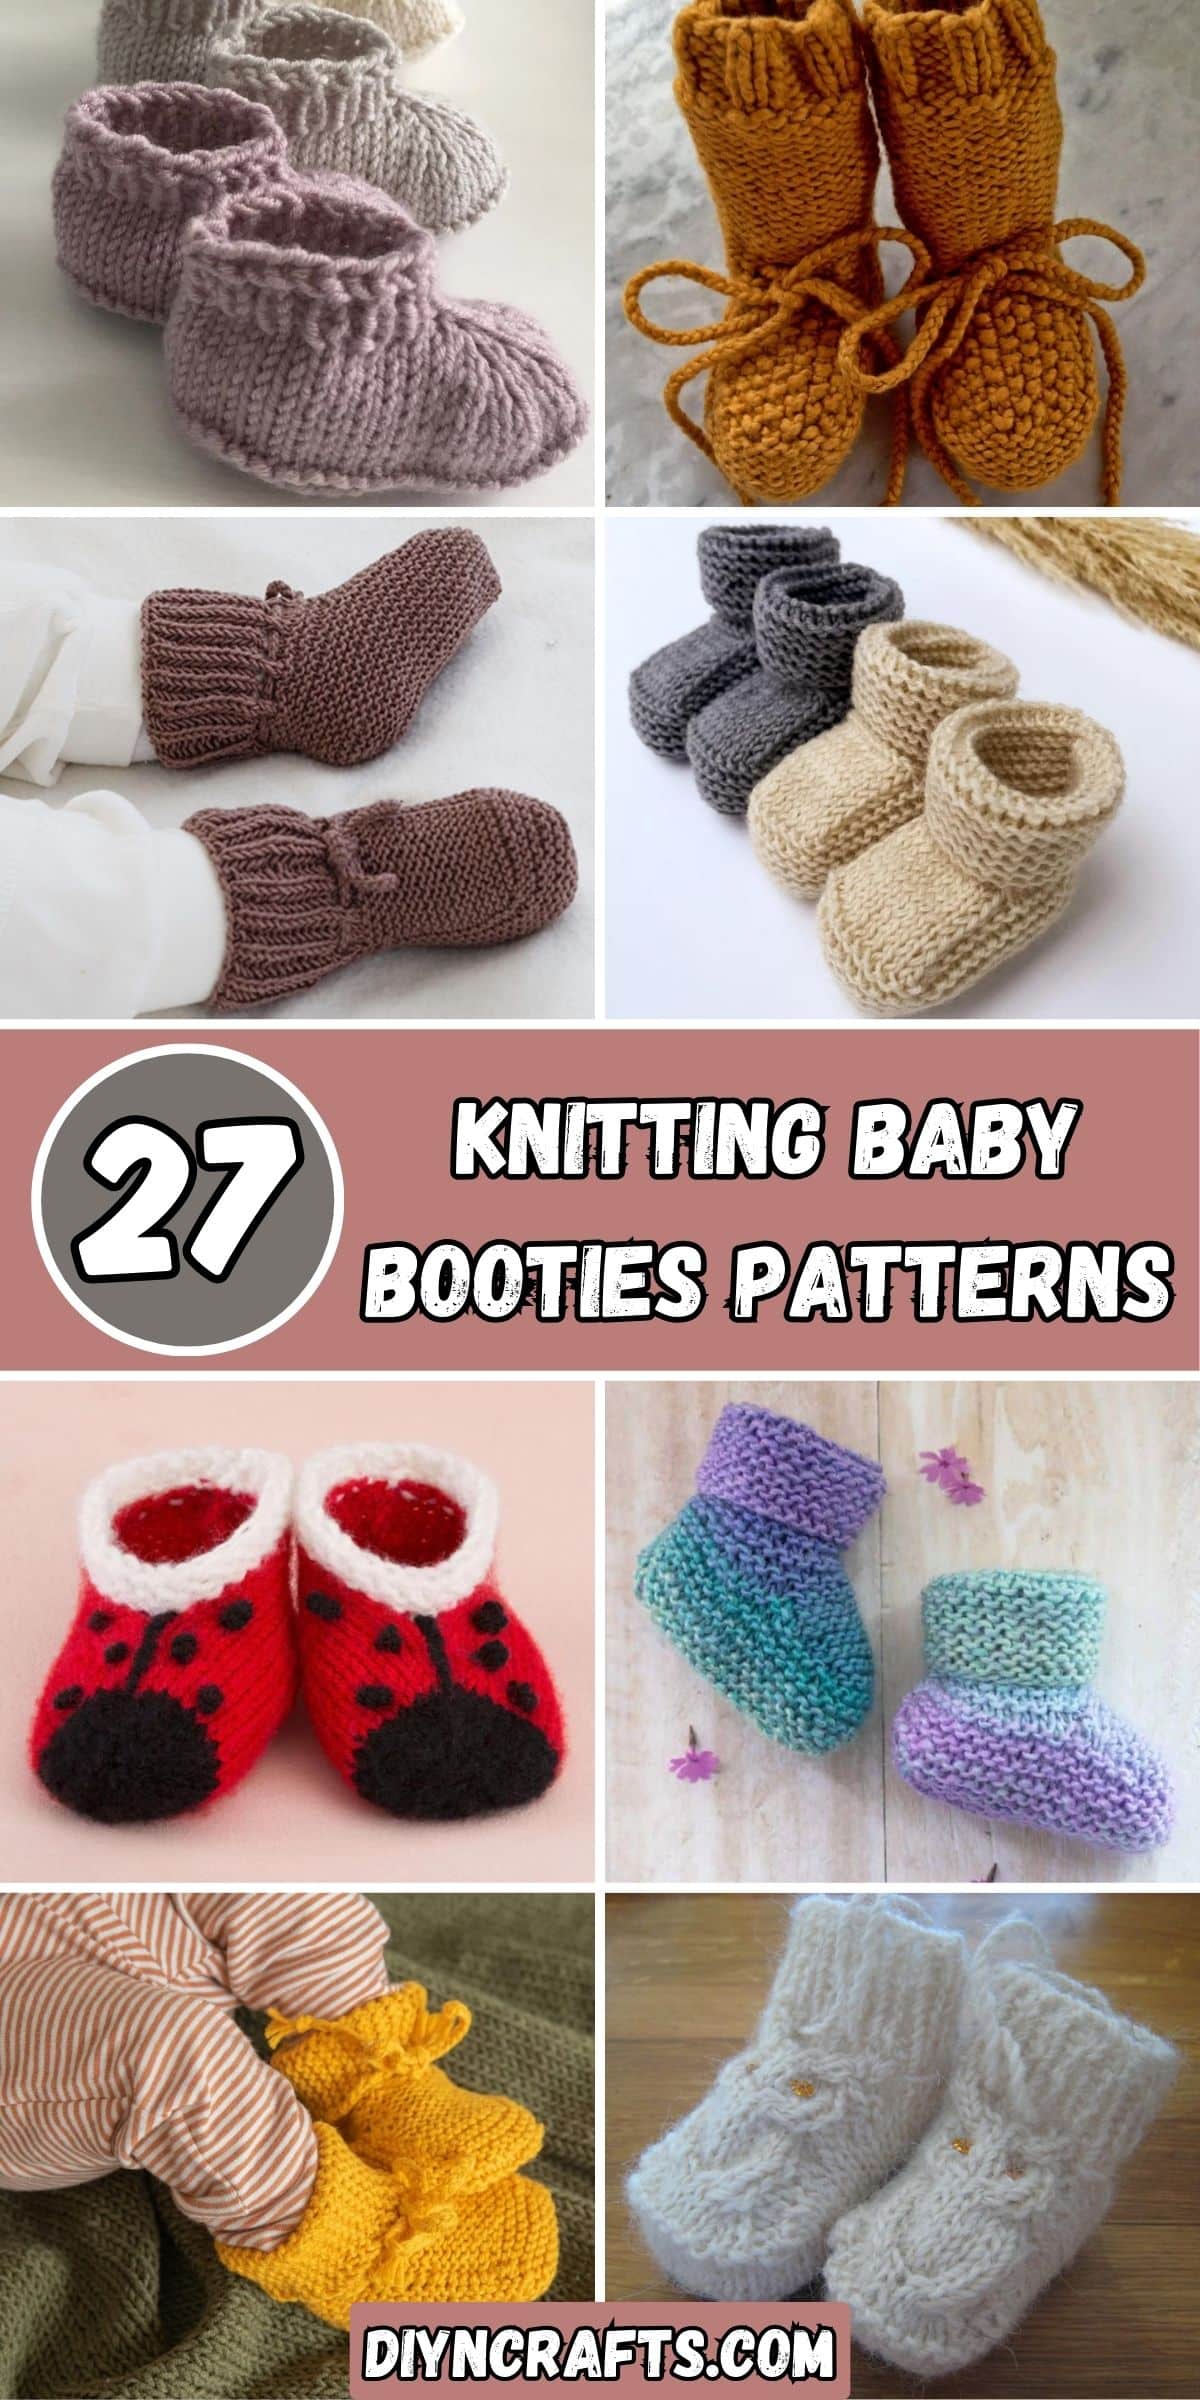 27 Knitting Baby Booties Patterns collage.